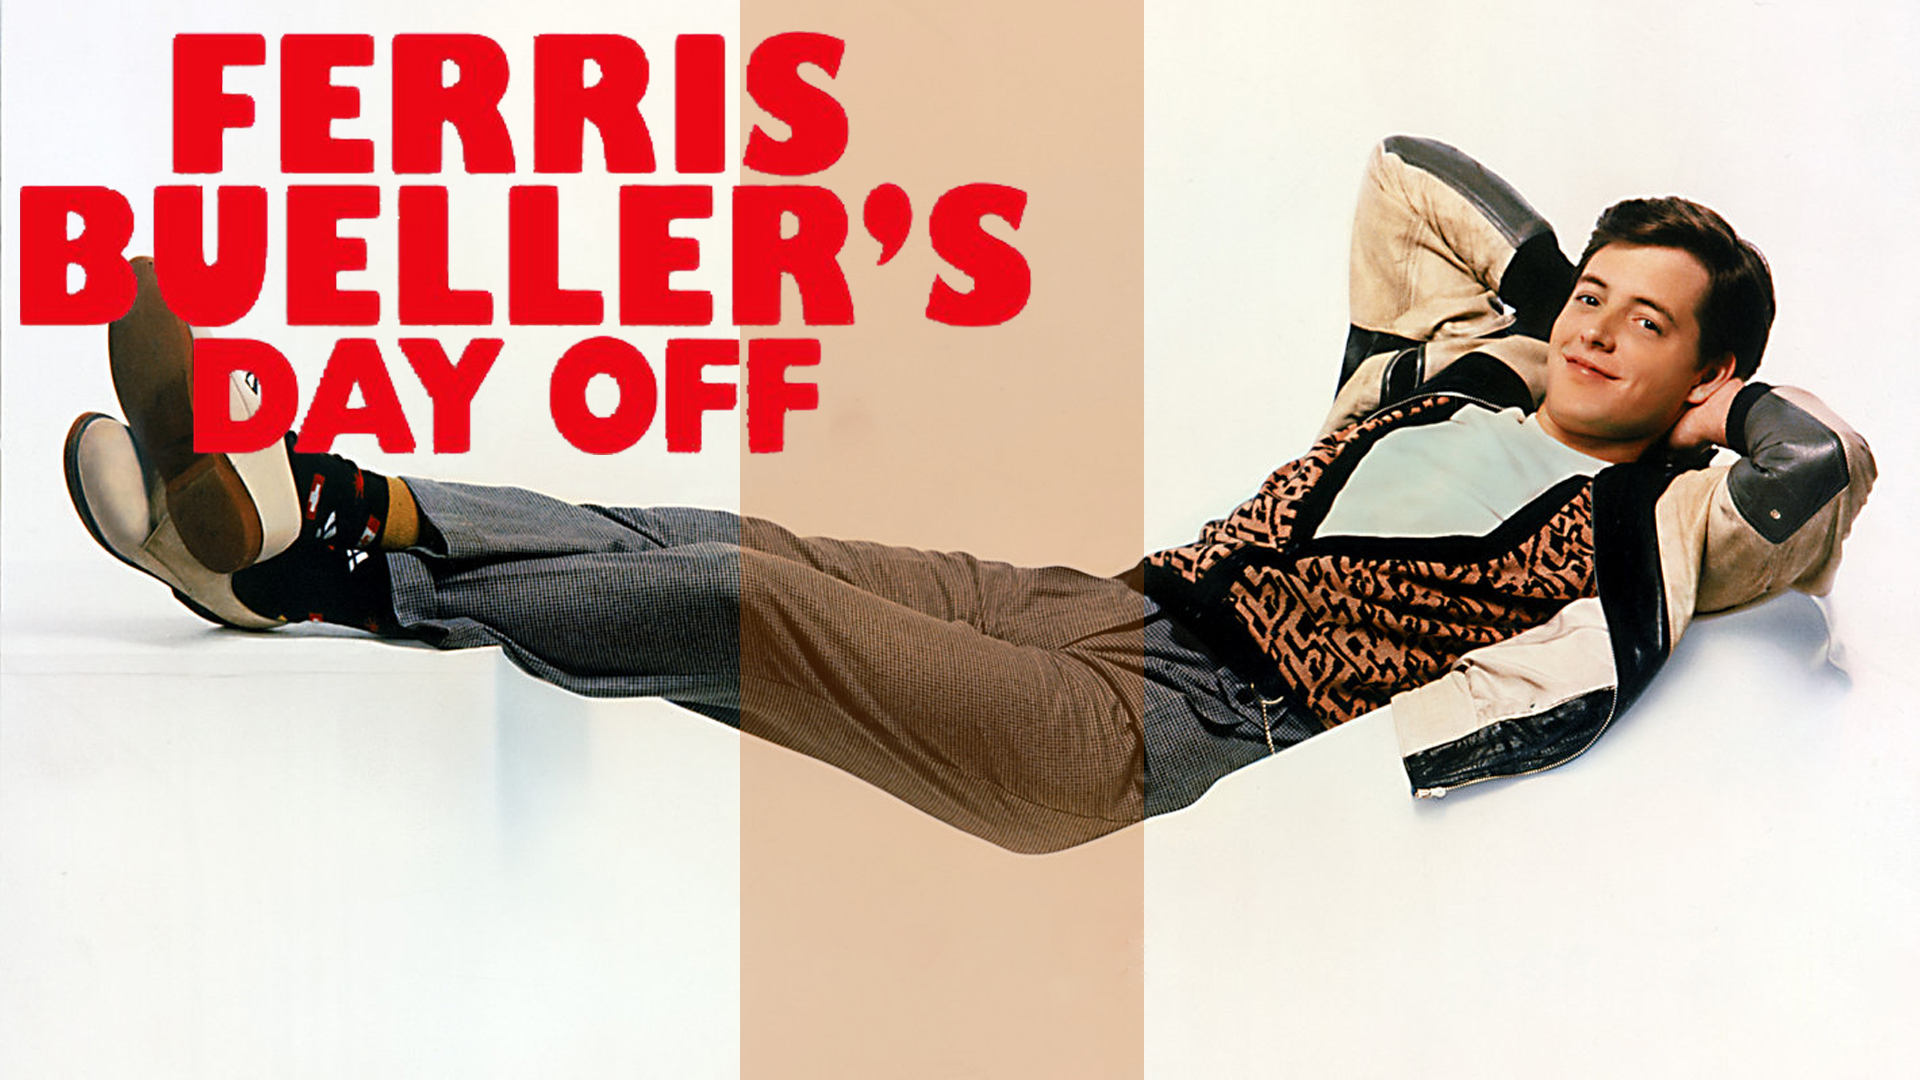 Ferris Bueller's Day Off Images. 